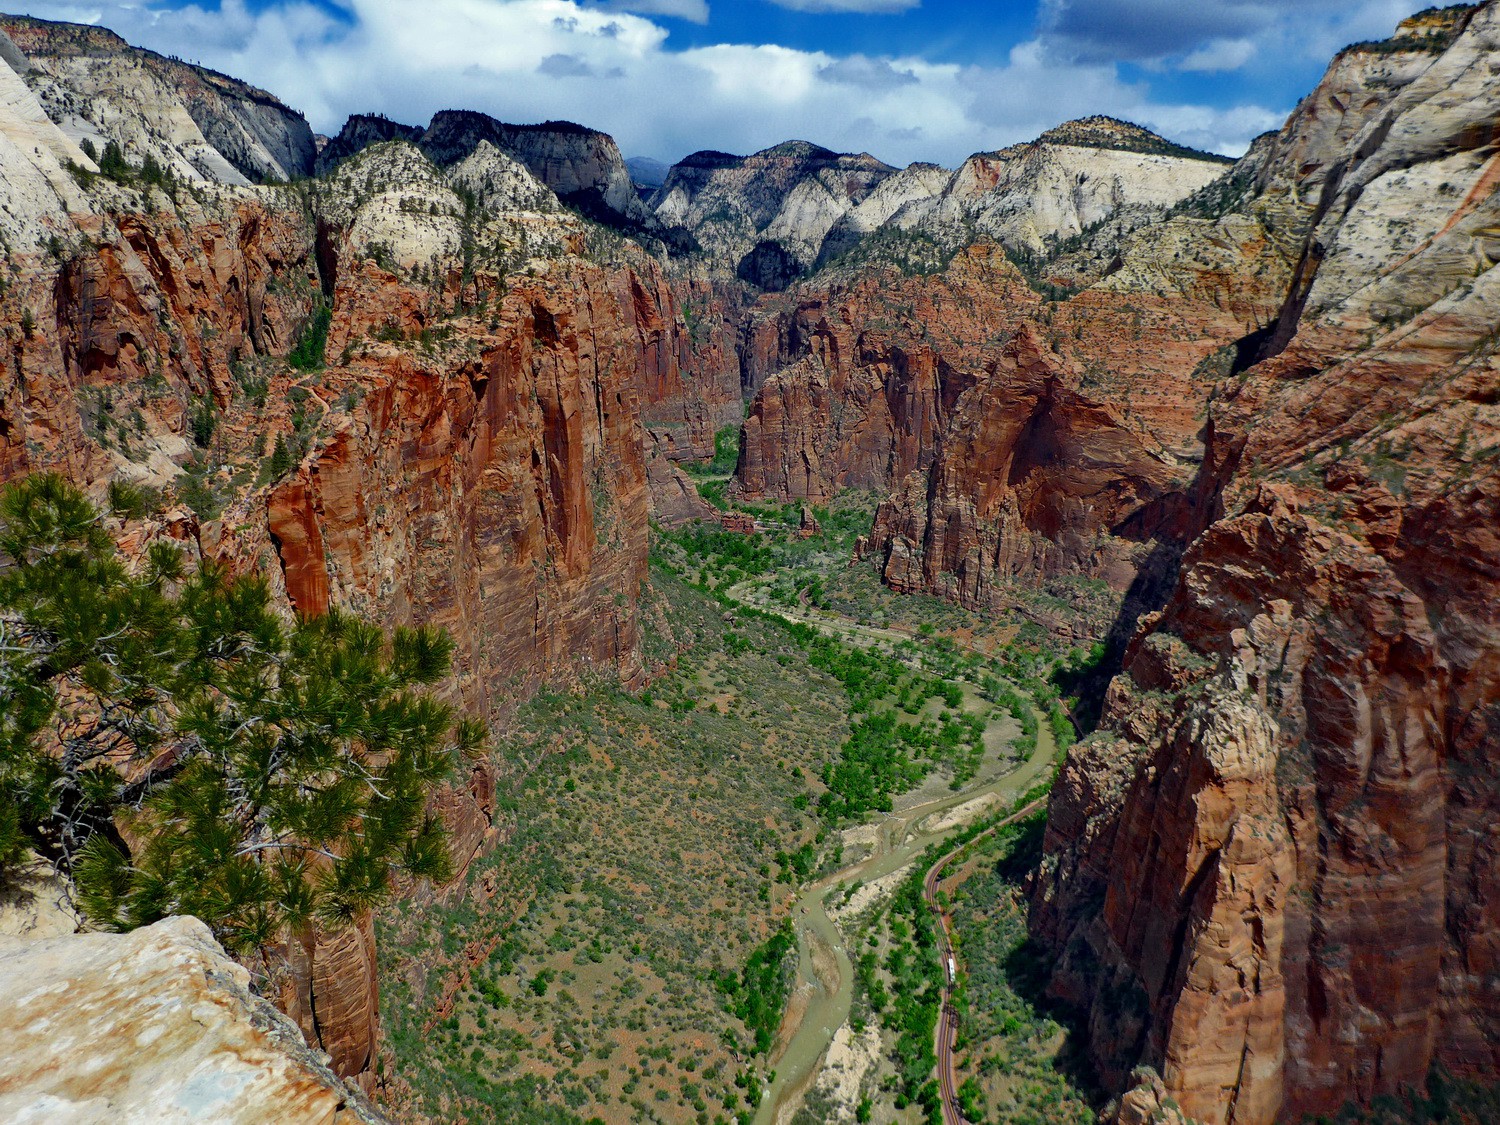 View into the Zion Canyon